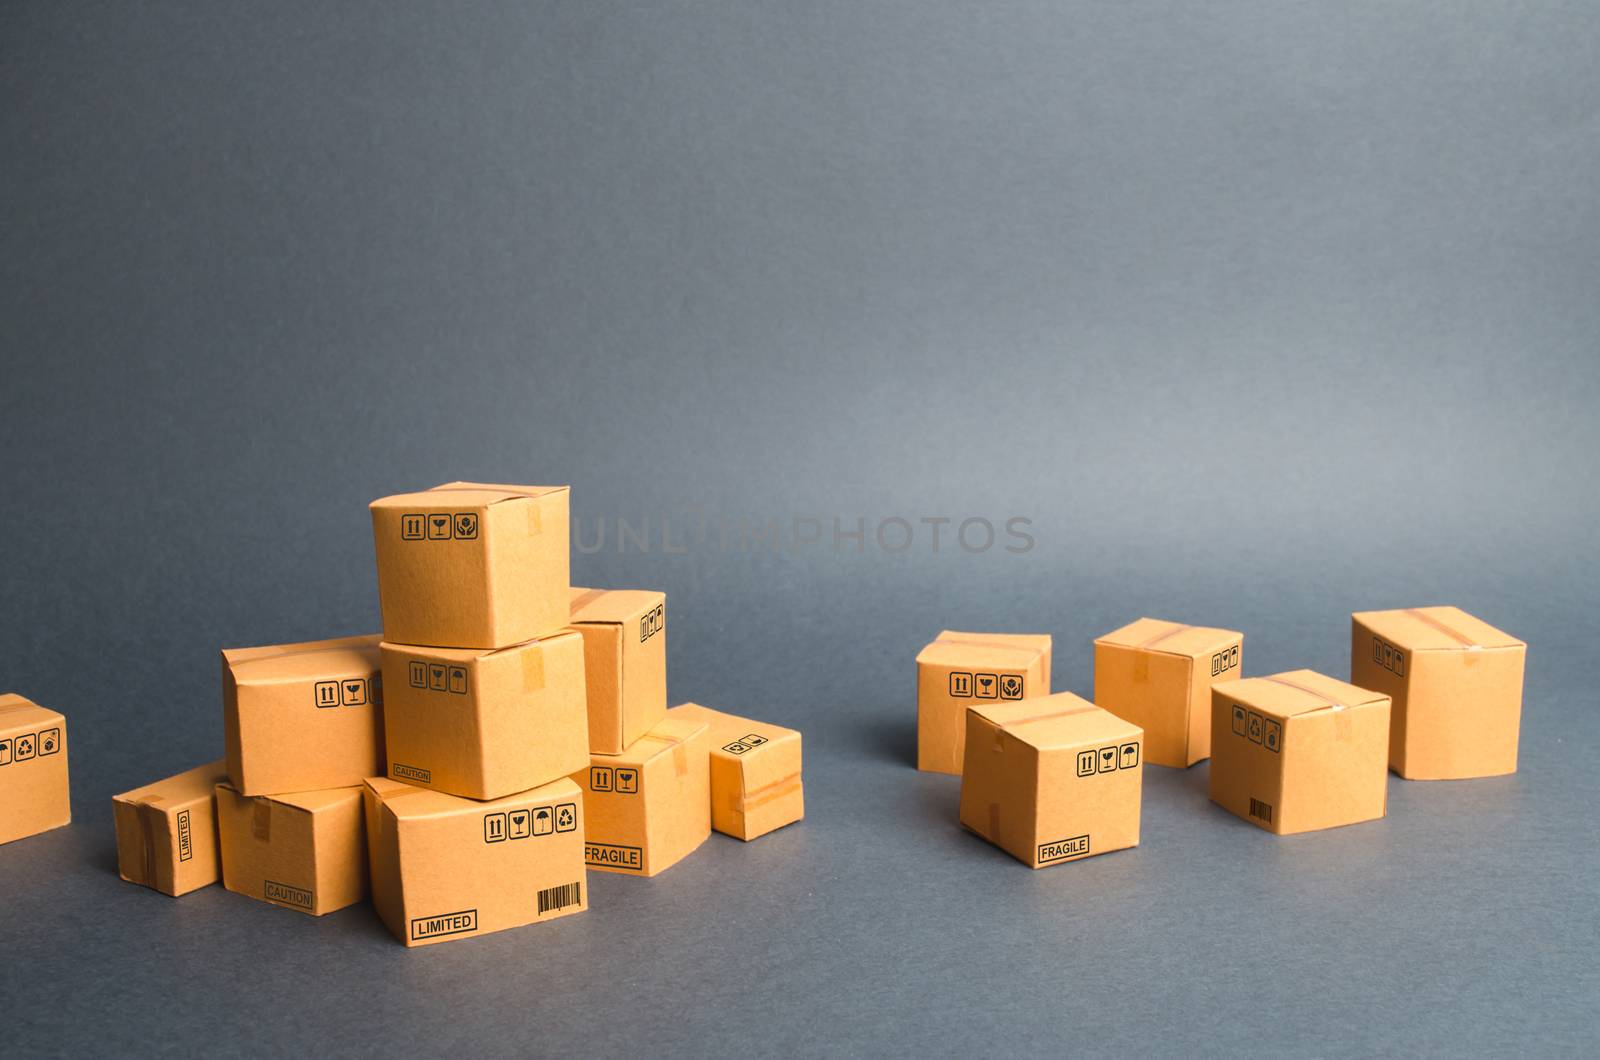 Many cardboard boxes. products, goods, commerce and retail. E-commerce, sale of goods through online trading platform. Freight shipping, deliver. sales of goods and services. Warehouse, stock by iLixe48